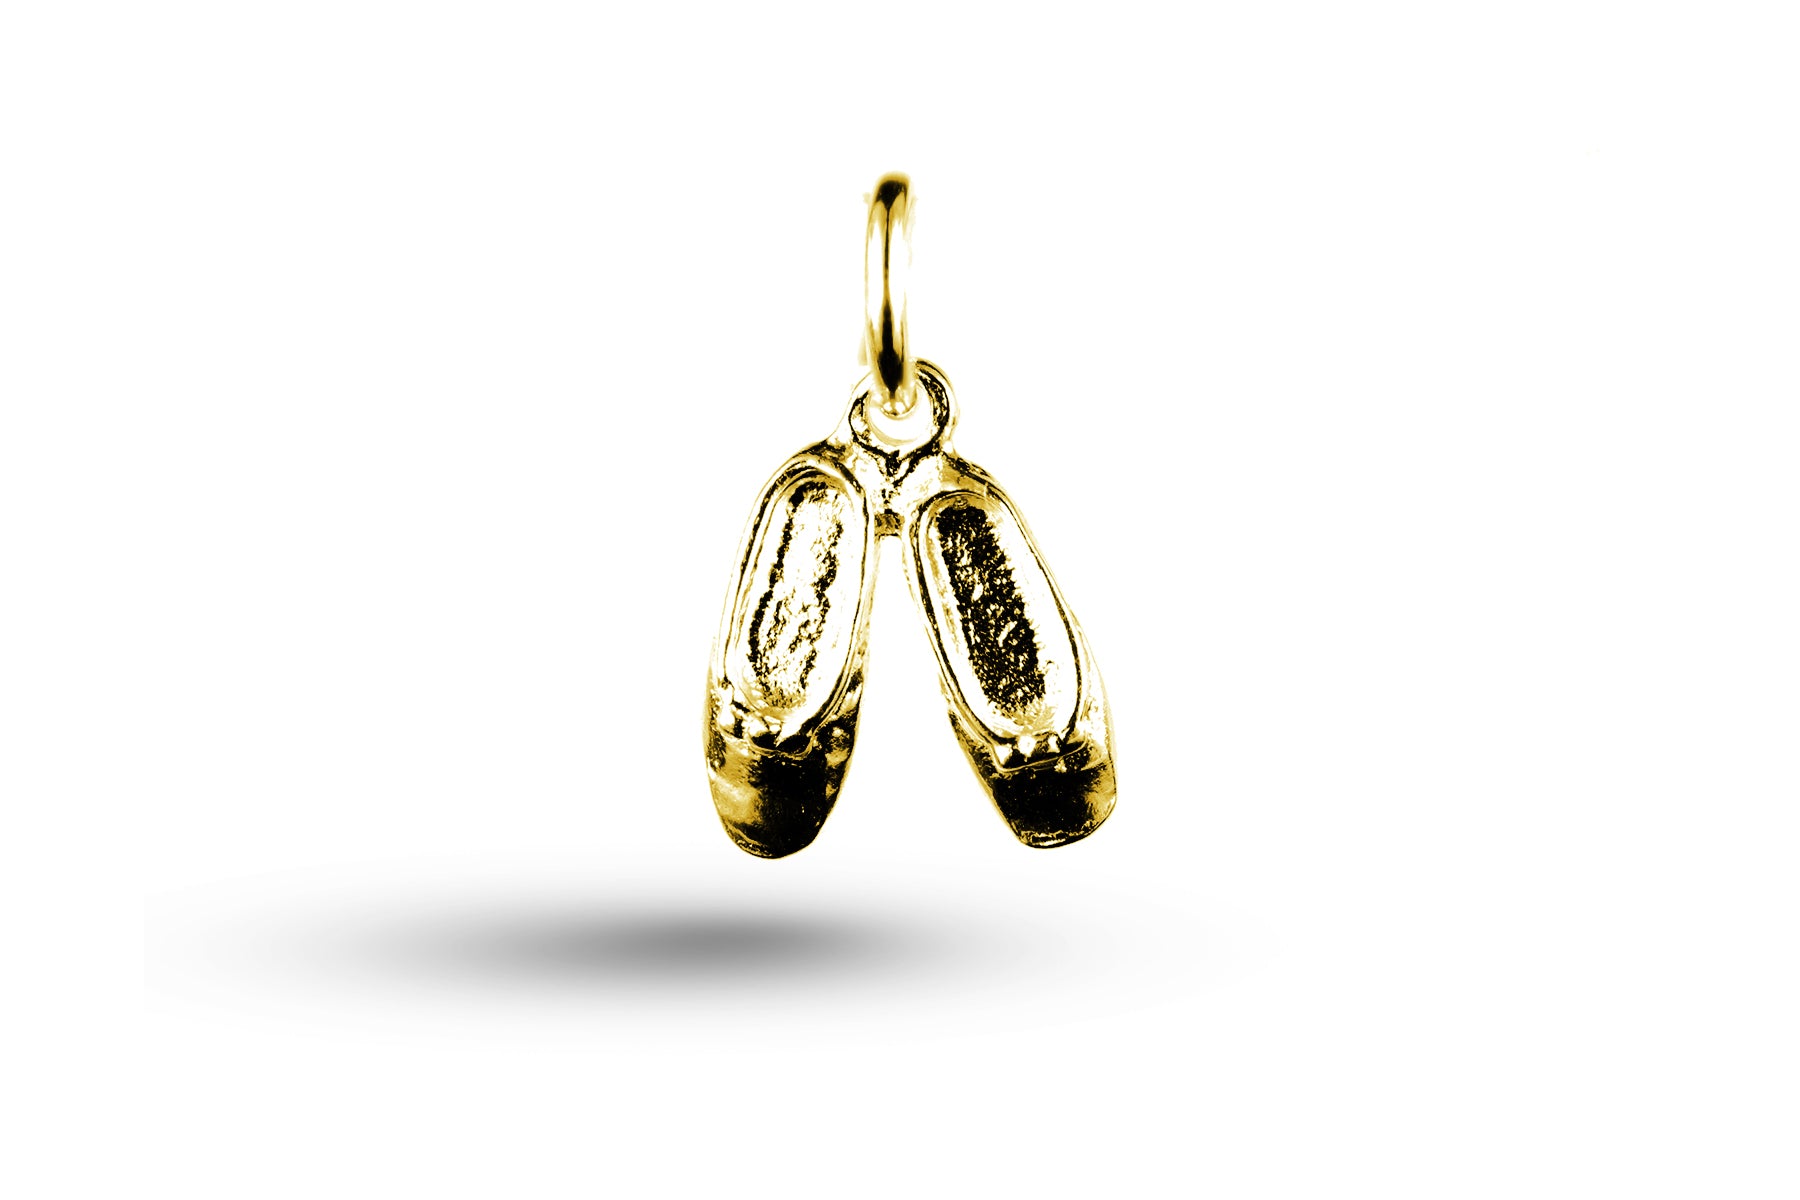 Luxury yellow gold Childs Ballet Slippers charm.